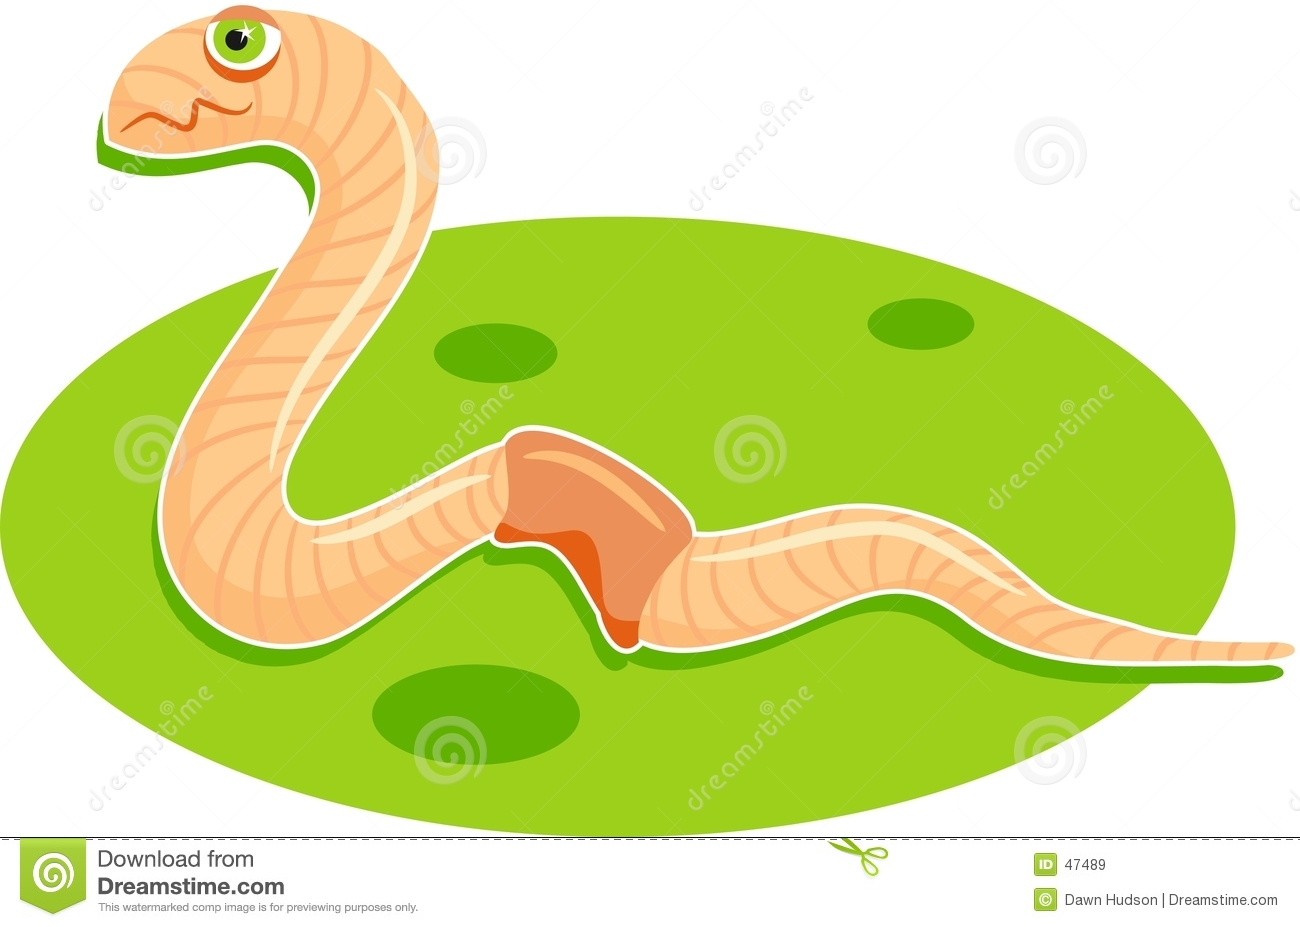 Earthworm Royalty Free Stock Images   Image  47489